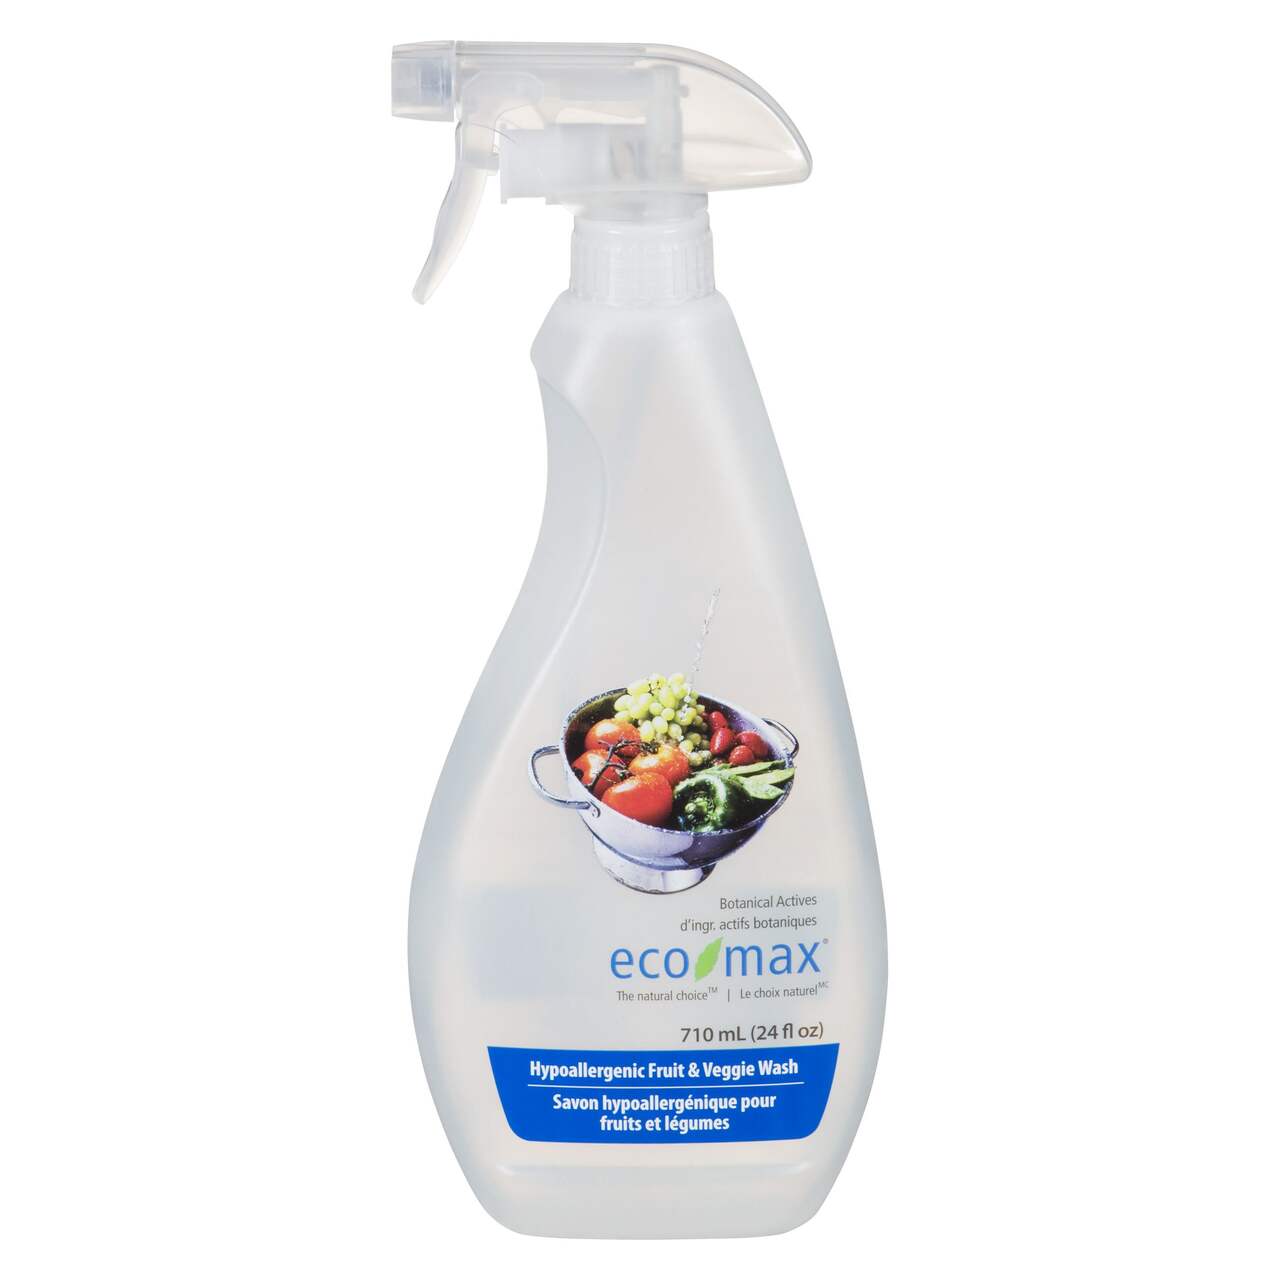 https://media-www.canadiantire.ca/product/living/cleaning/household-cleaning-solutions/1530662/eco-max-fruit-and-veggie-wash-6c0ffbaa-5ac0-46cd-ae18-8cdfa9a7741c-jpgrendition.jpg?imdensity=1&imwidth=640&impolicy=mZoom